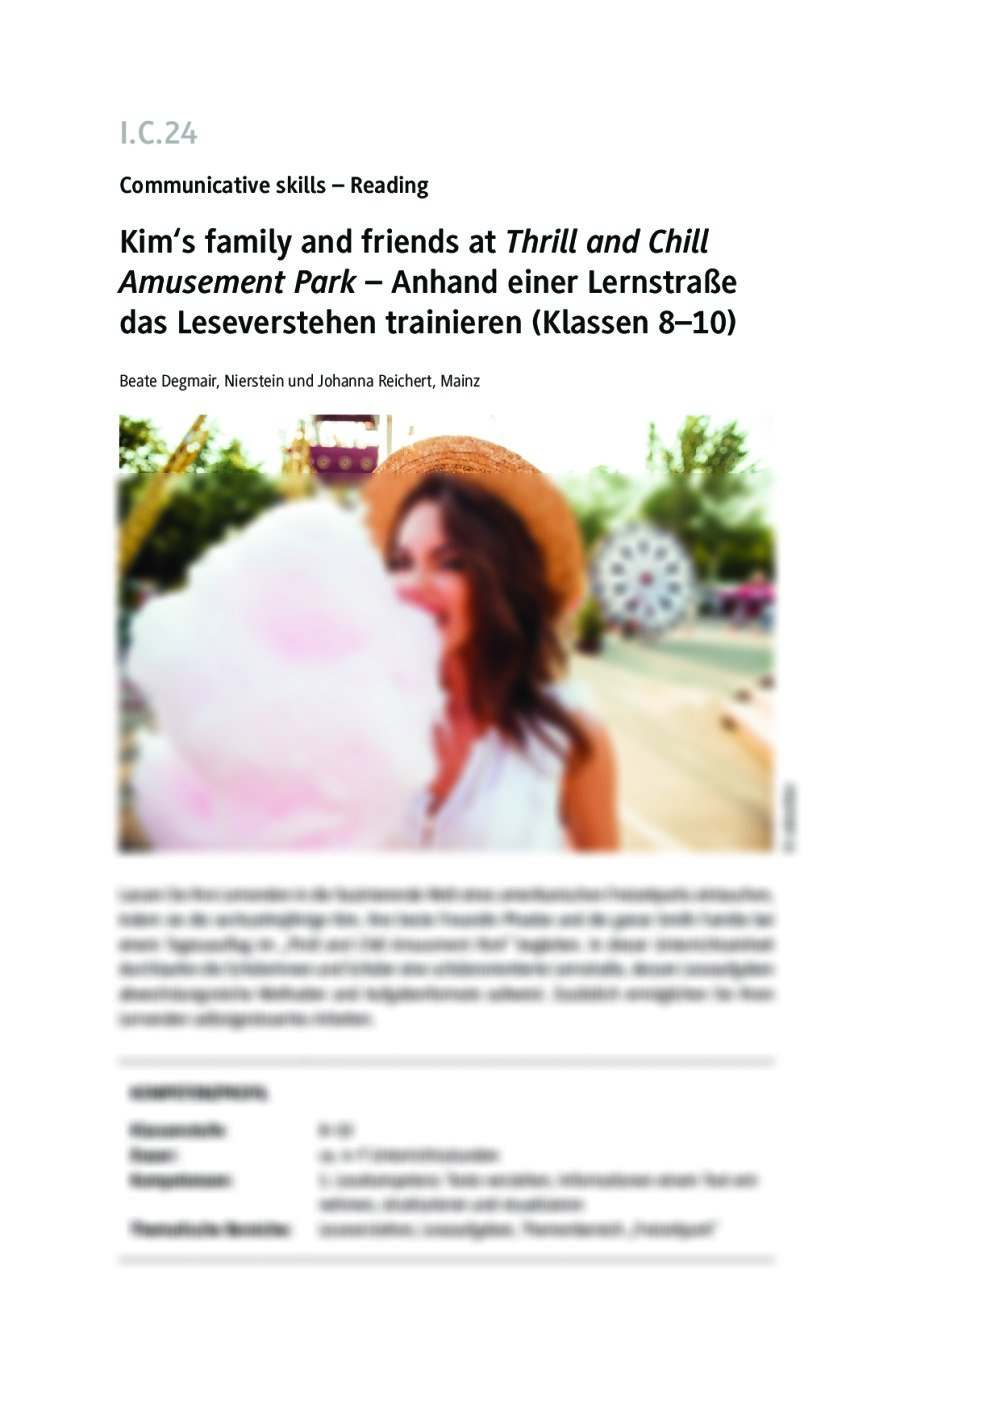 Kim's family and friends at Thrill and Chill Amusement Park - Seite 1